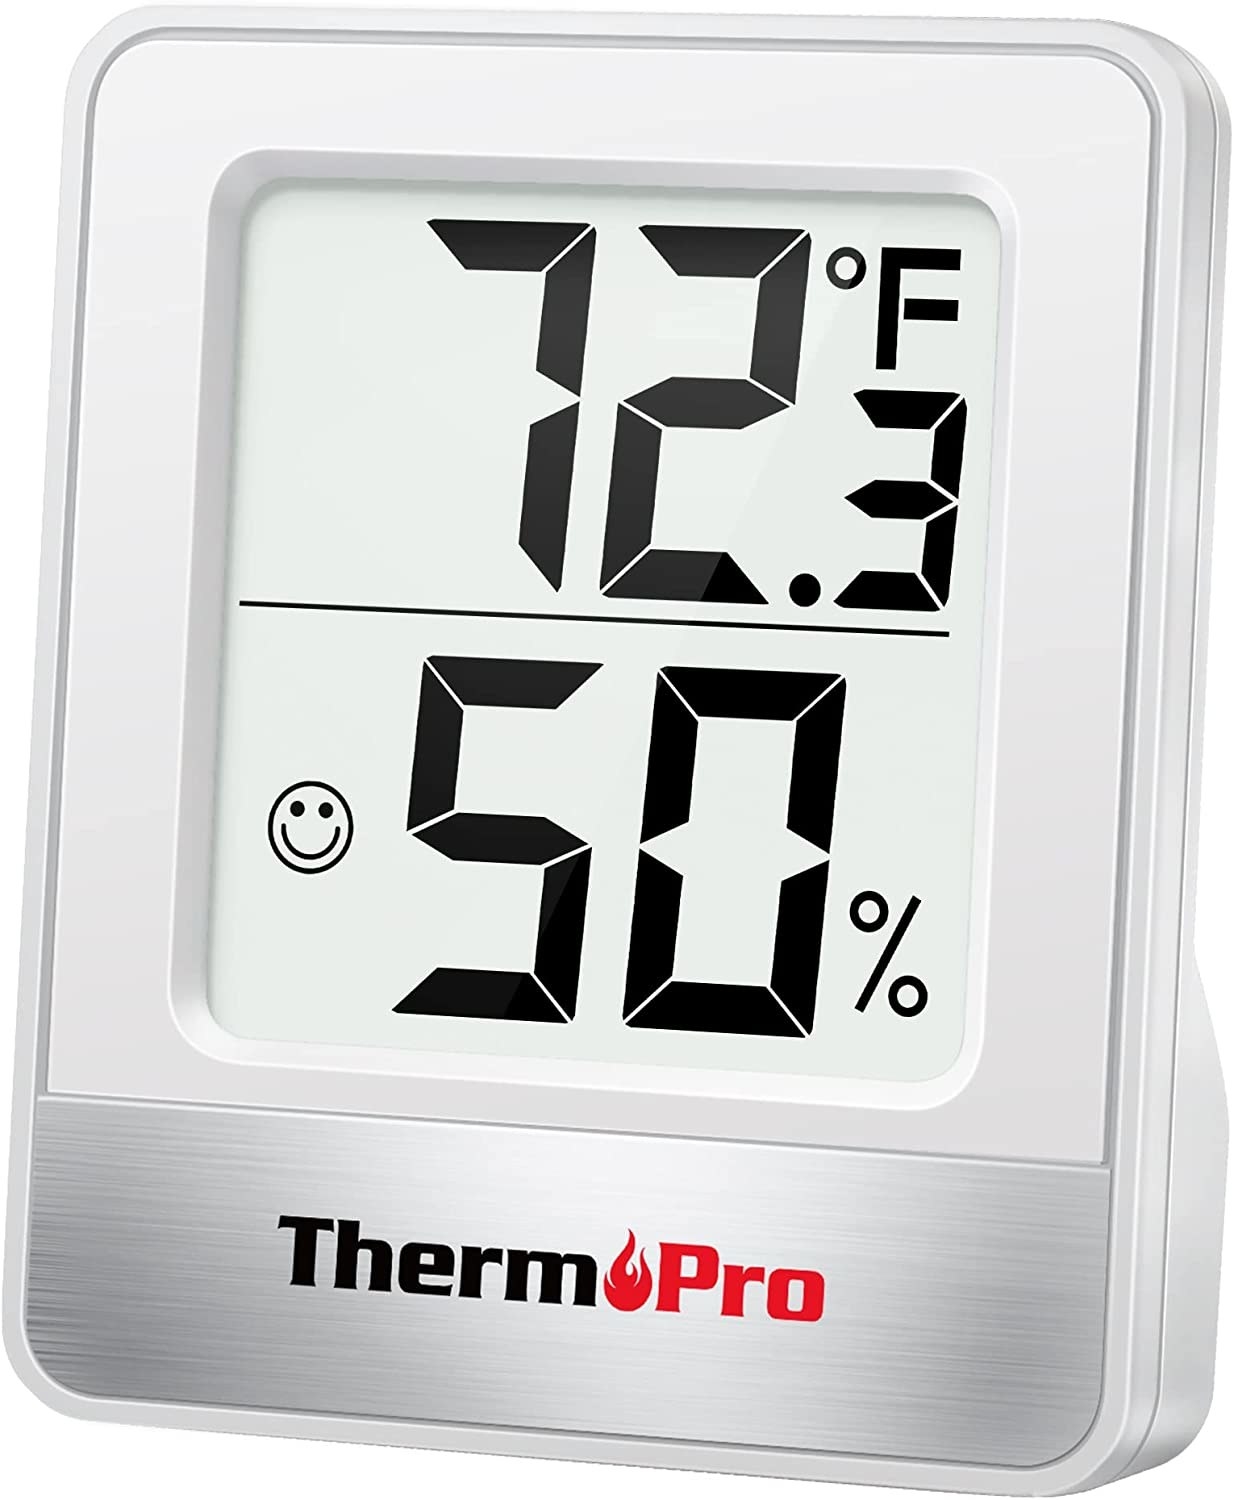 a digital thermometer with large numbers